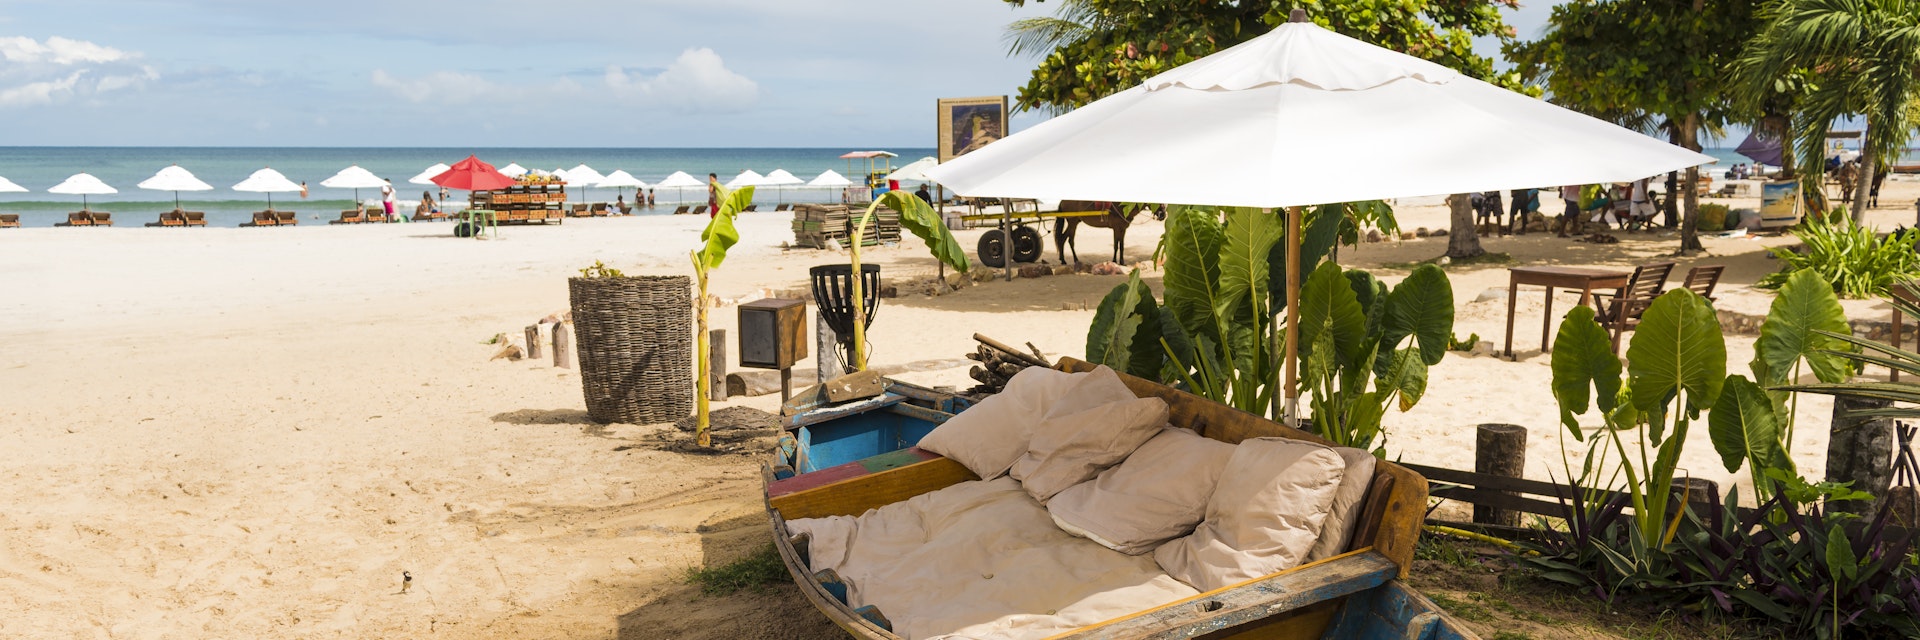 Tratirional boat used as a relaxing chair in Jericoacoara beach.